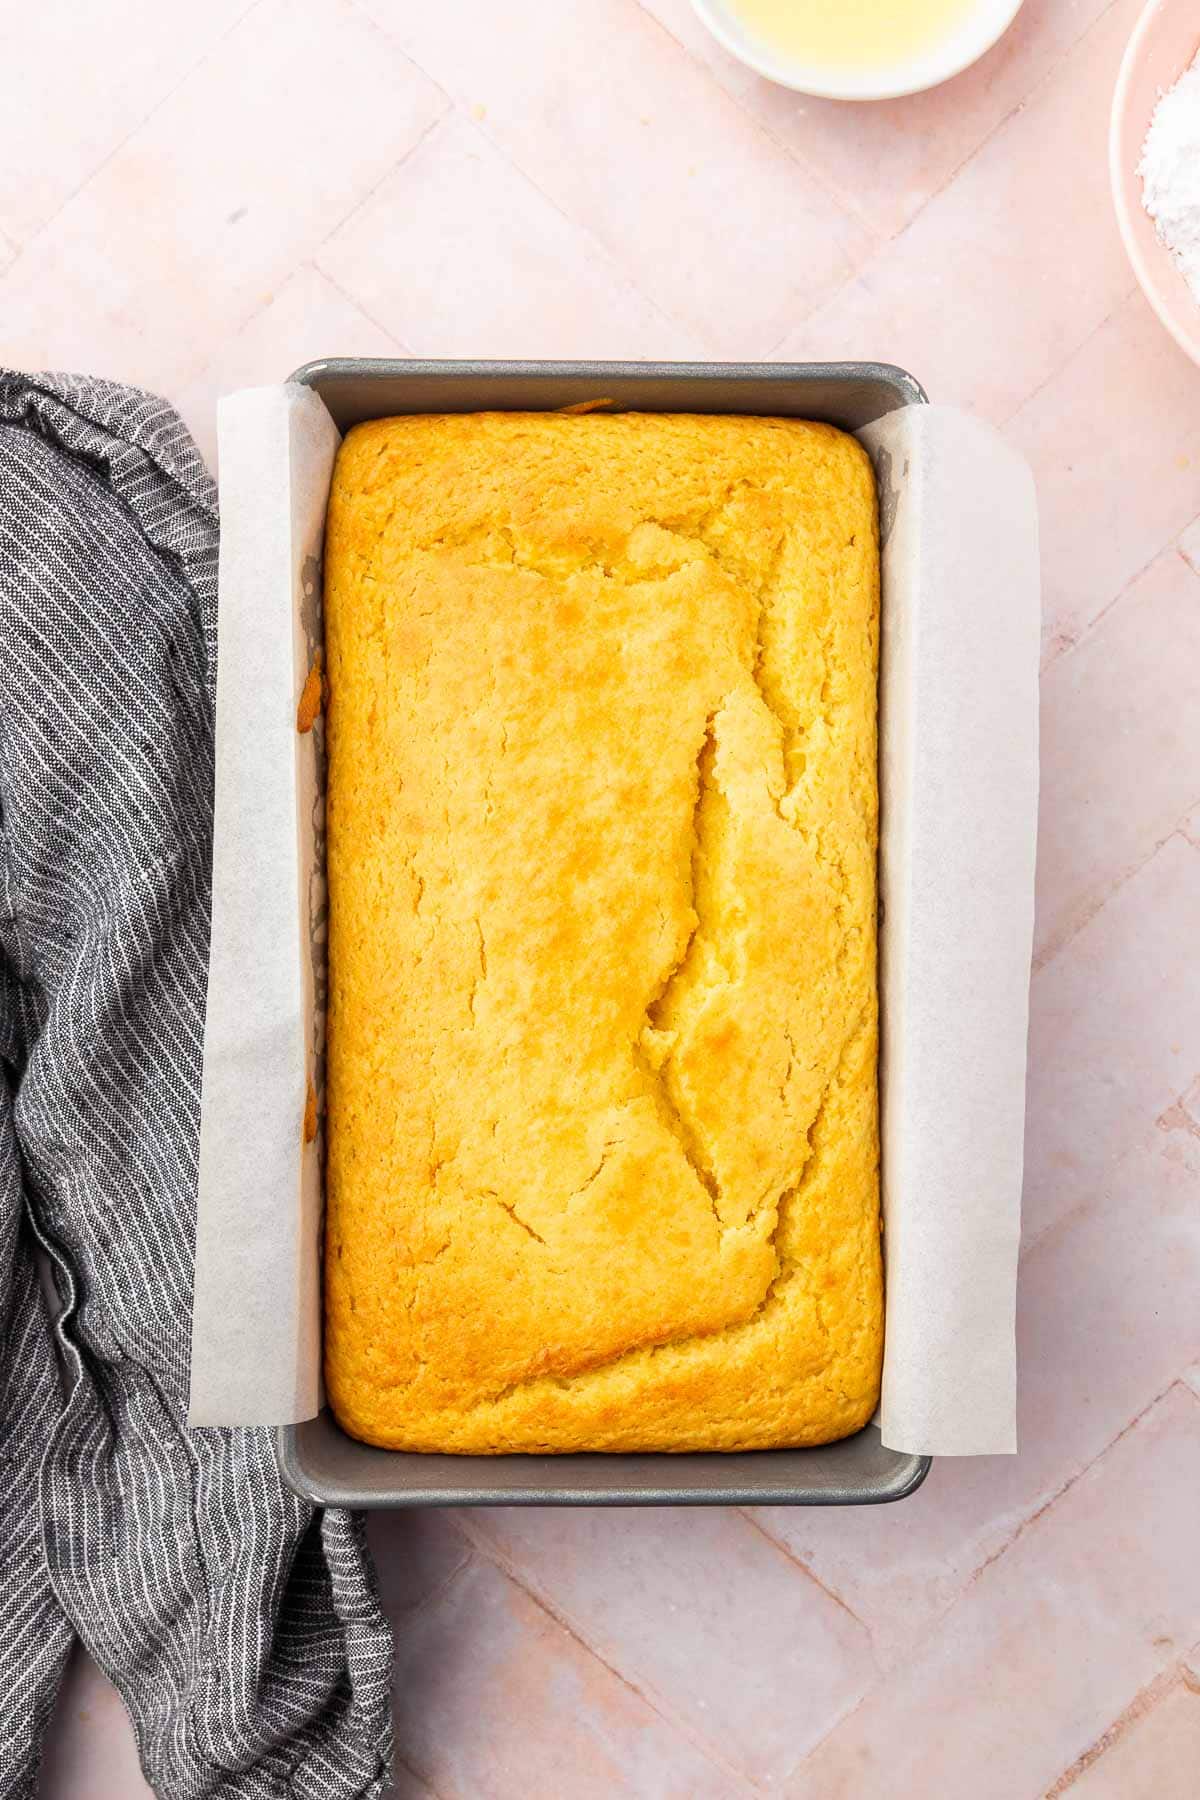 A gluten-free lemon drizzle cake in a loaf pan lined with parchment paper.